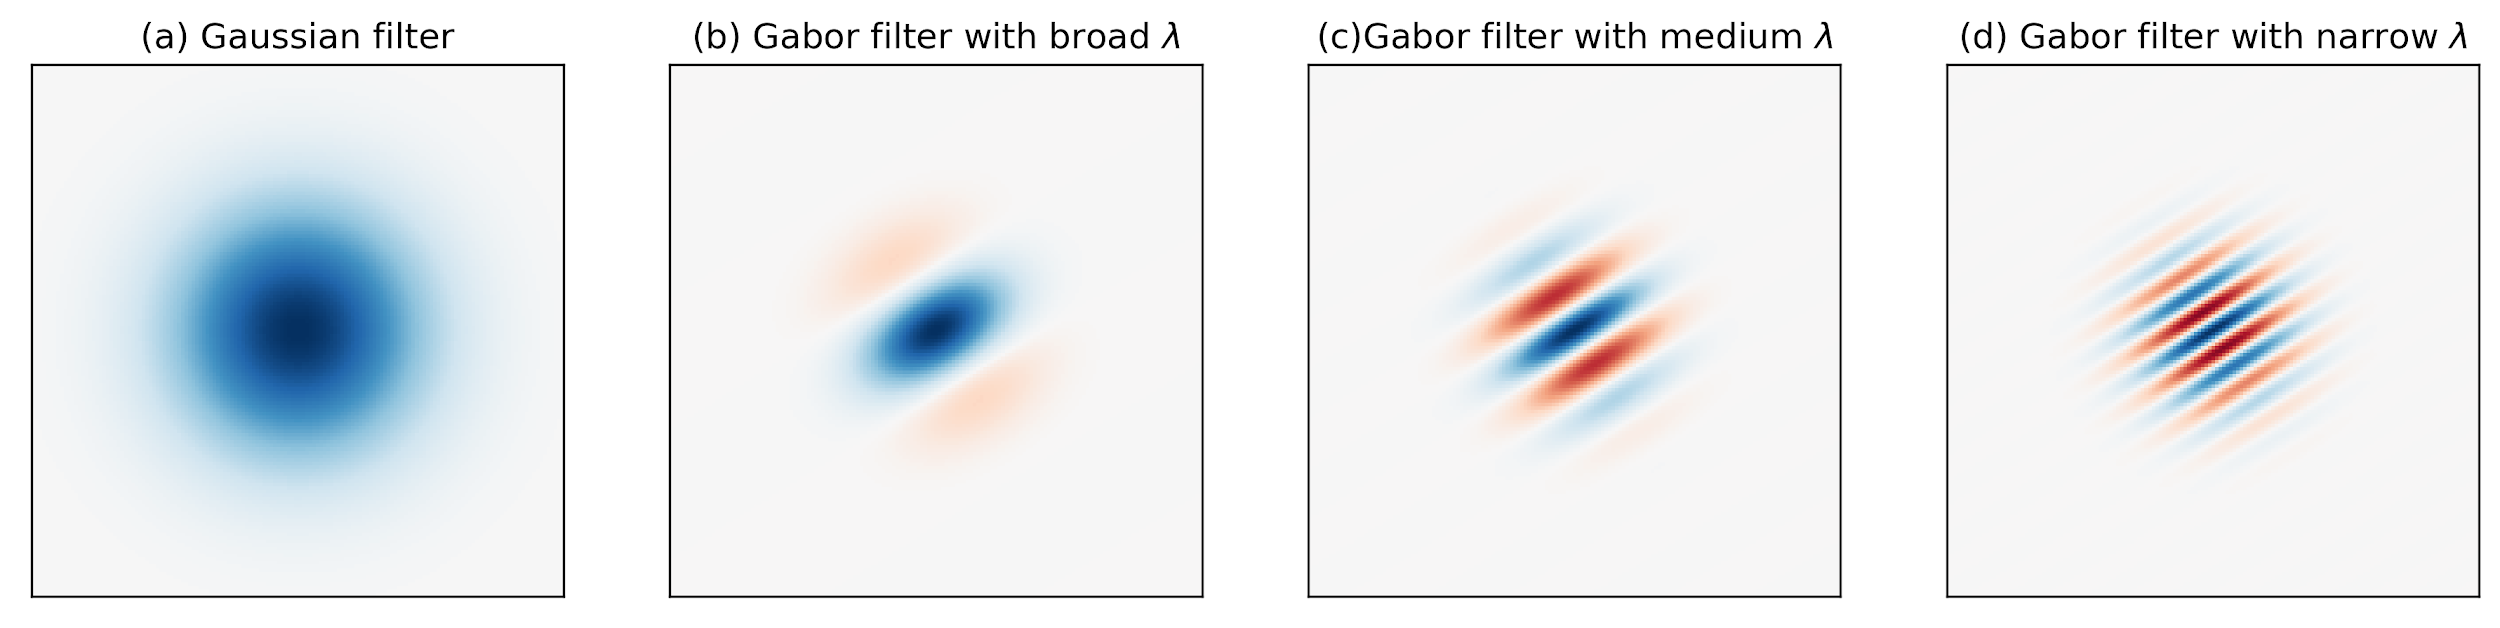 Figure 17: Varying wavelength (a-d) from large to small can change the spectral selectivity of Gabor filters from broad to narrow.